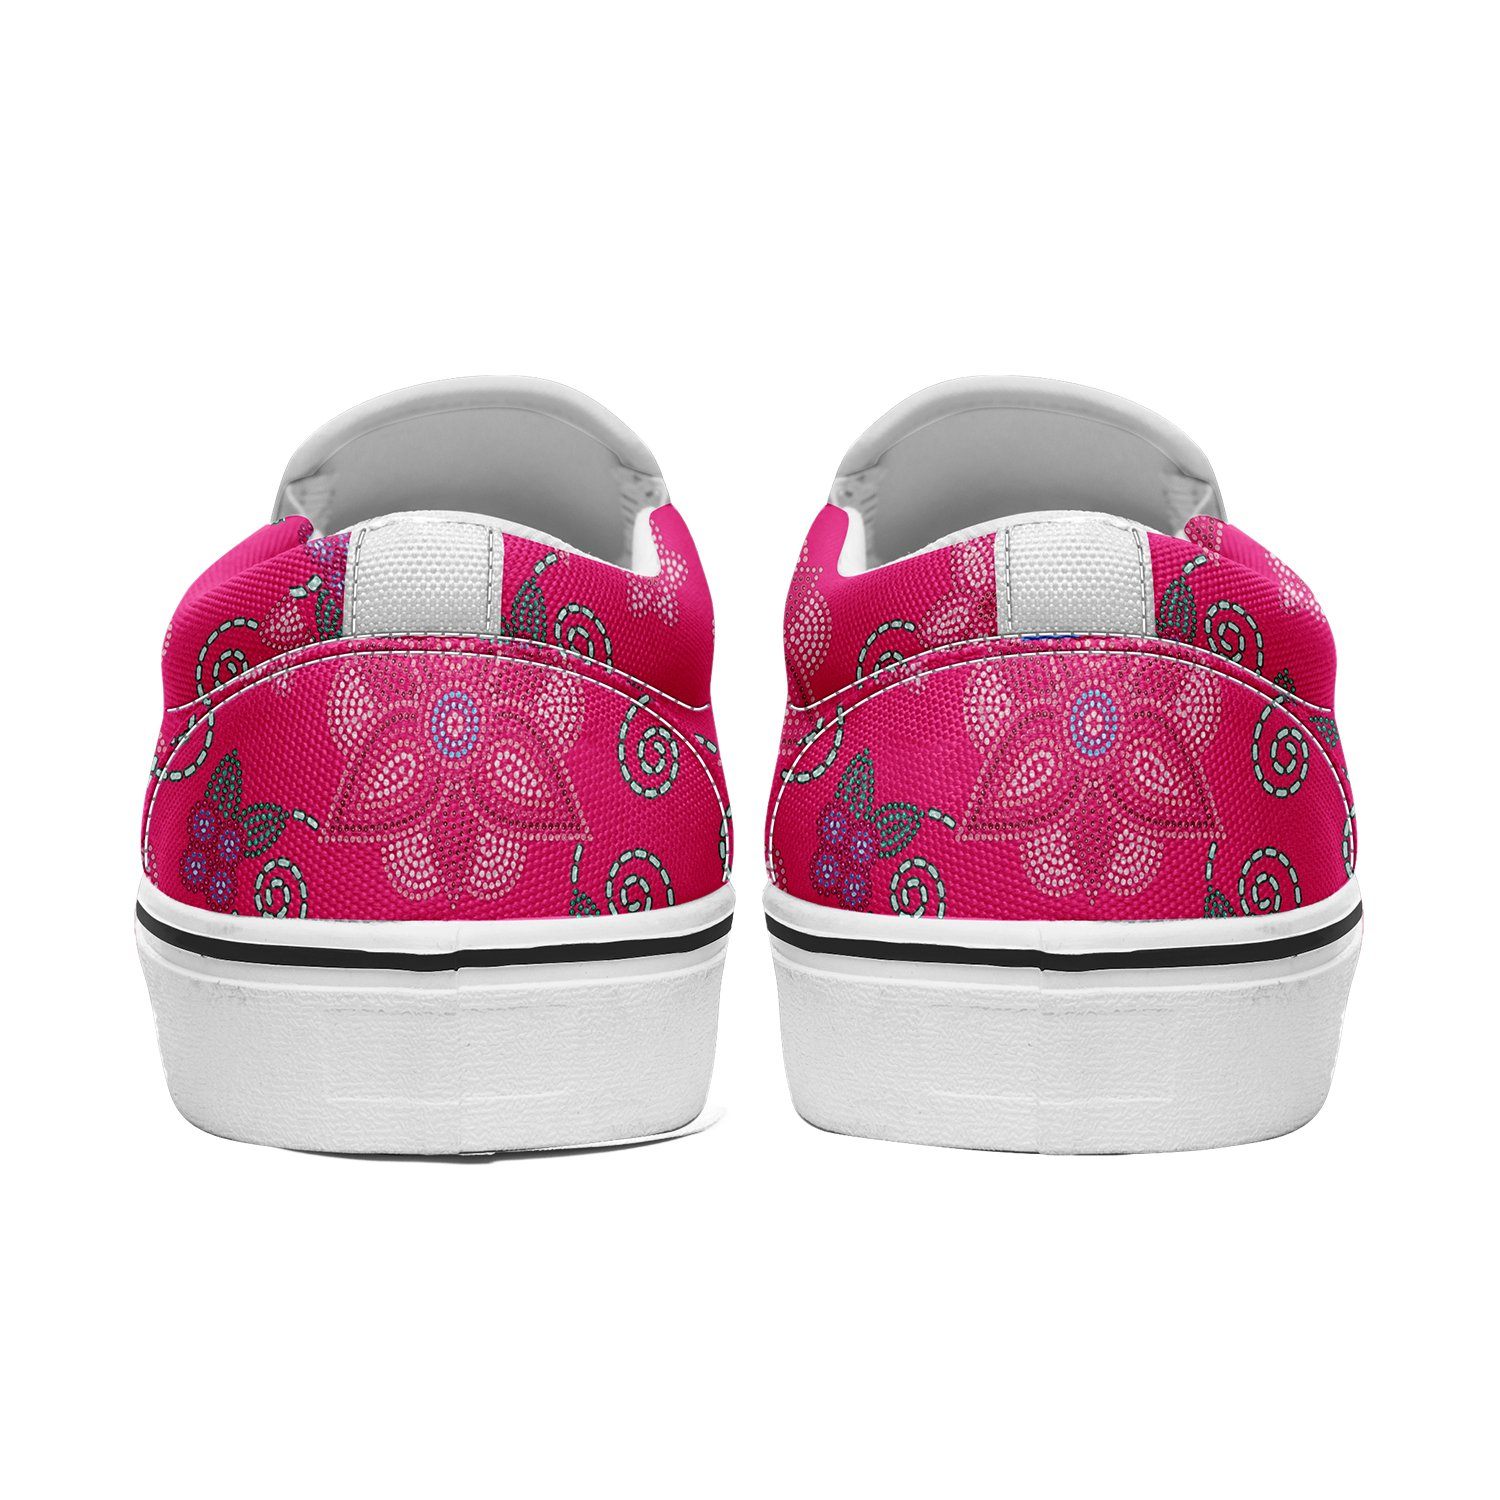 Berry Picking Pink Otoyimm Kid's Canvas Slip On Shoes otoyimm Herman 